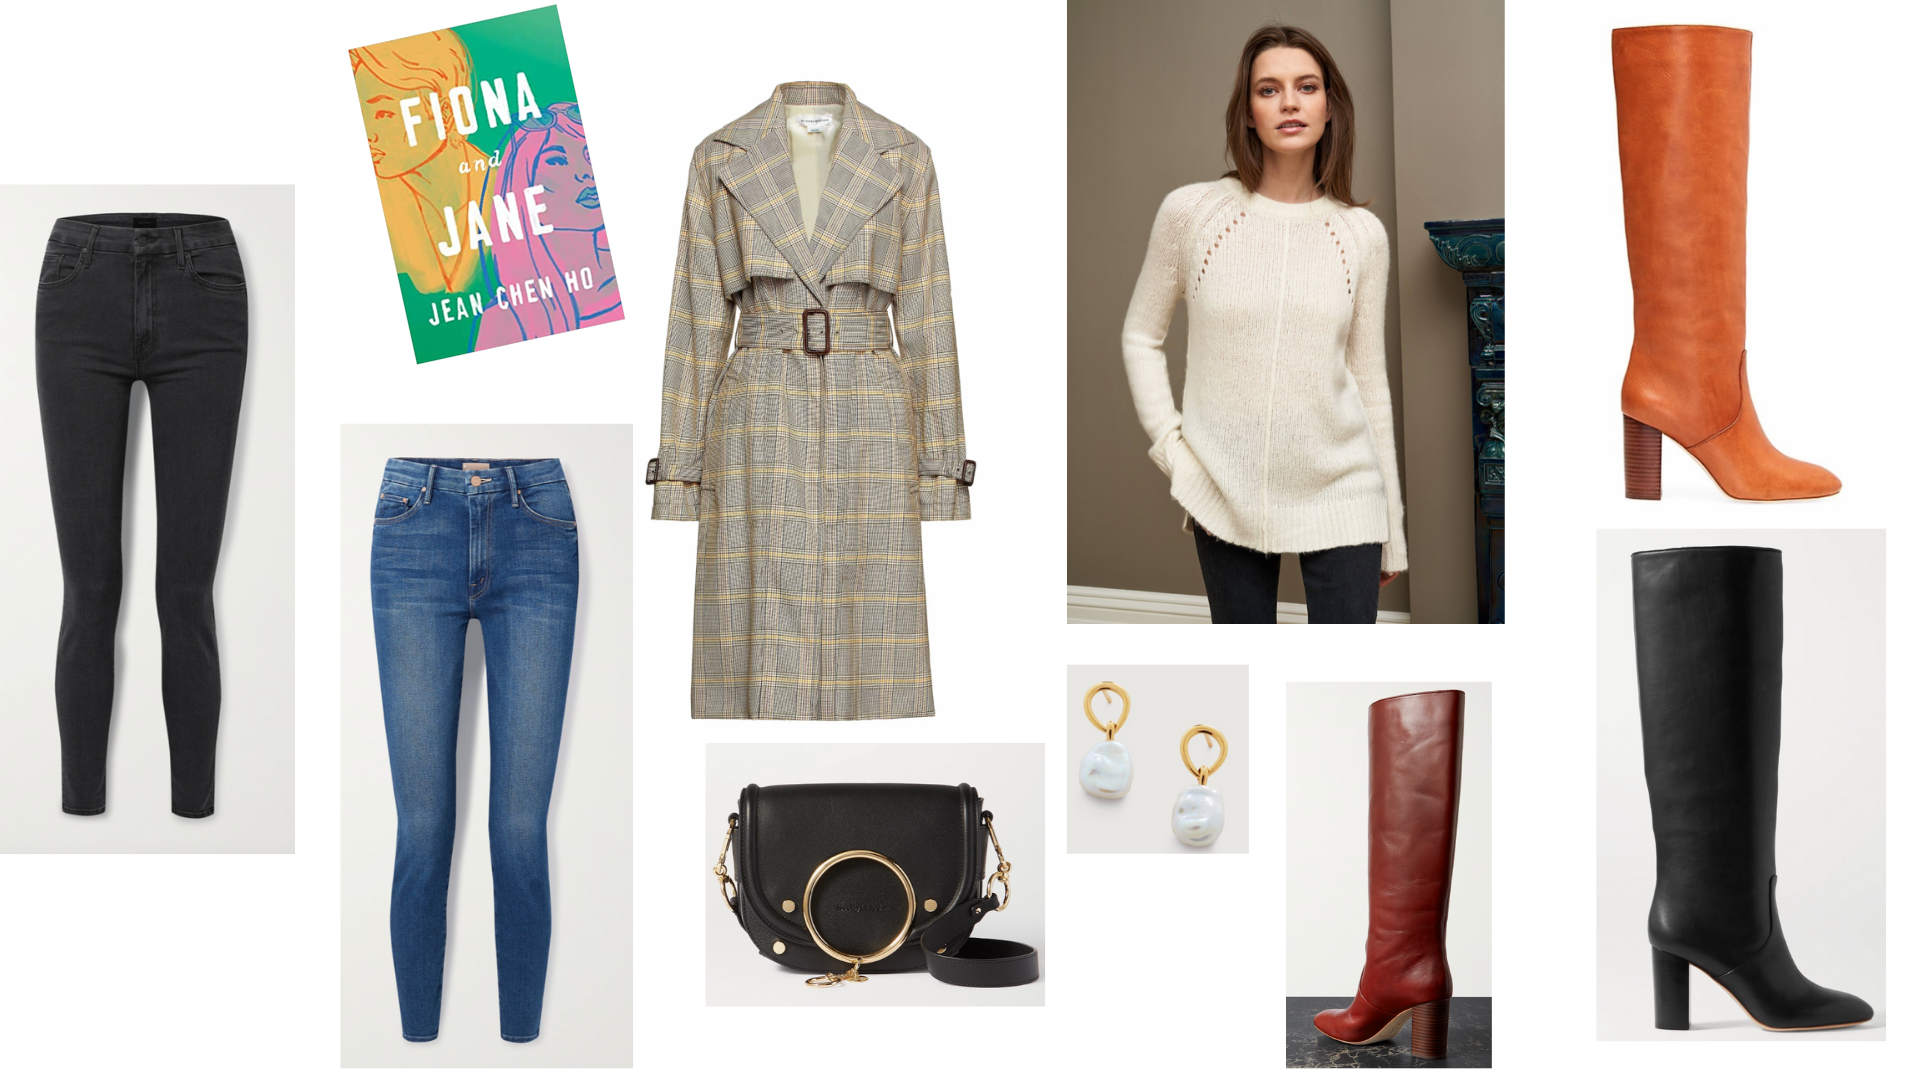 Outfit of January: A Warm, Chic Silhouette